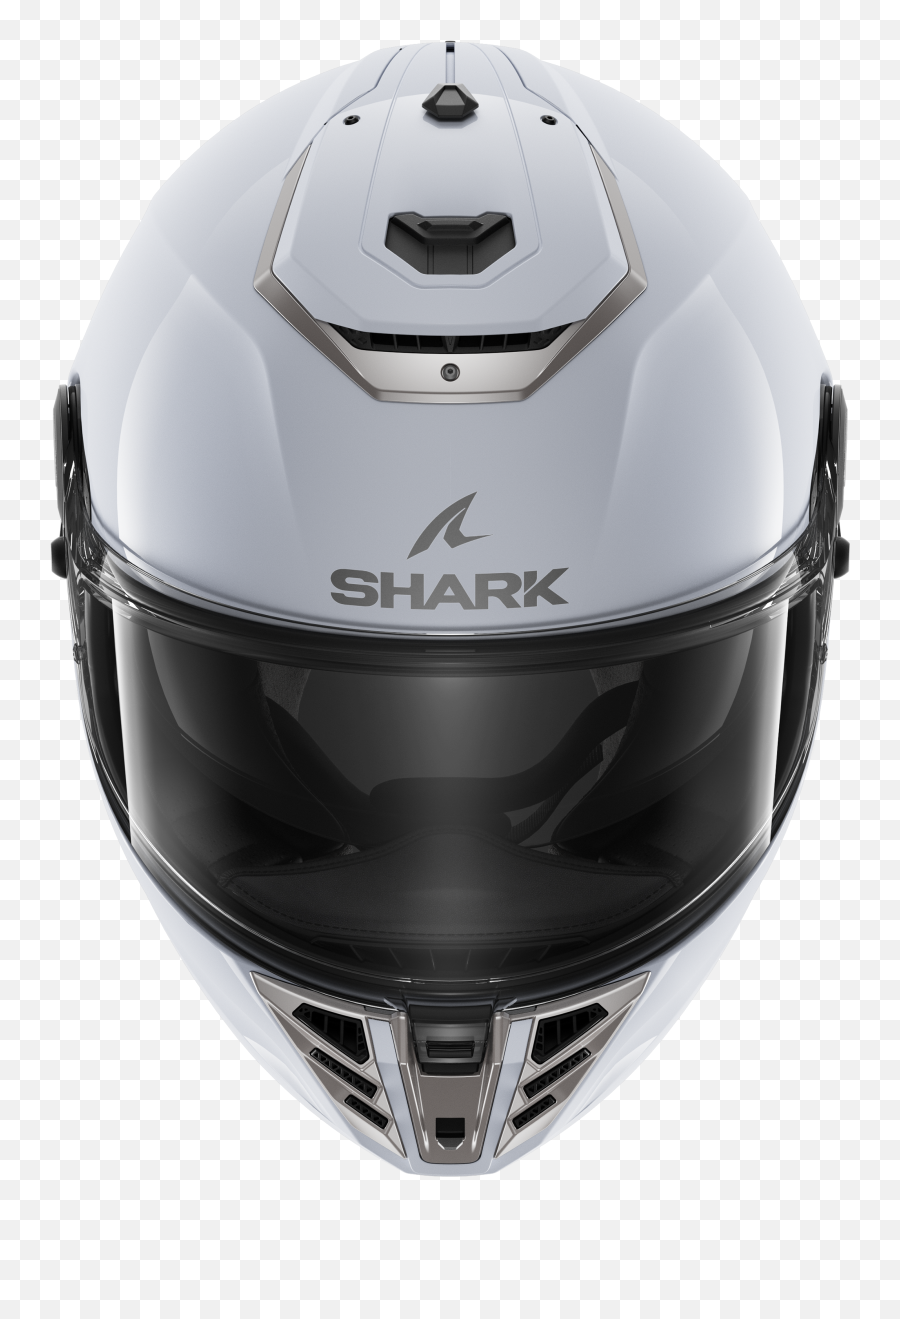 Helmets Spartan Rs Motorcycle Integral White Helmet Shark Png Icon Airframe Carbon